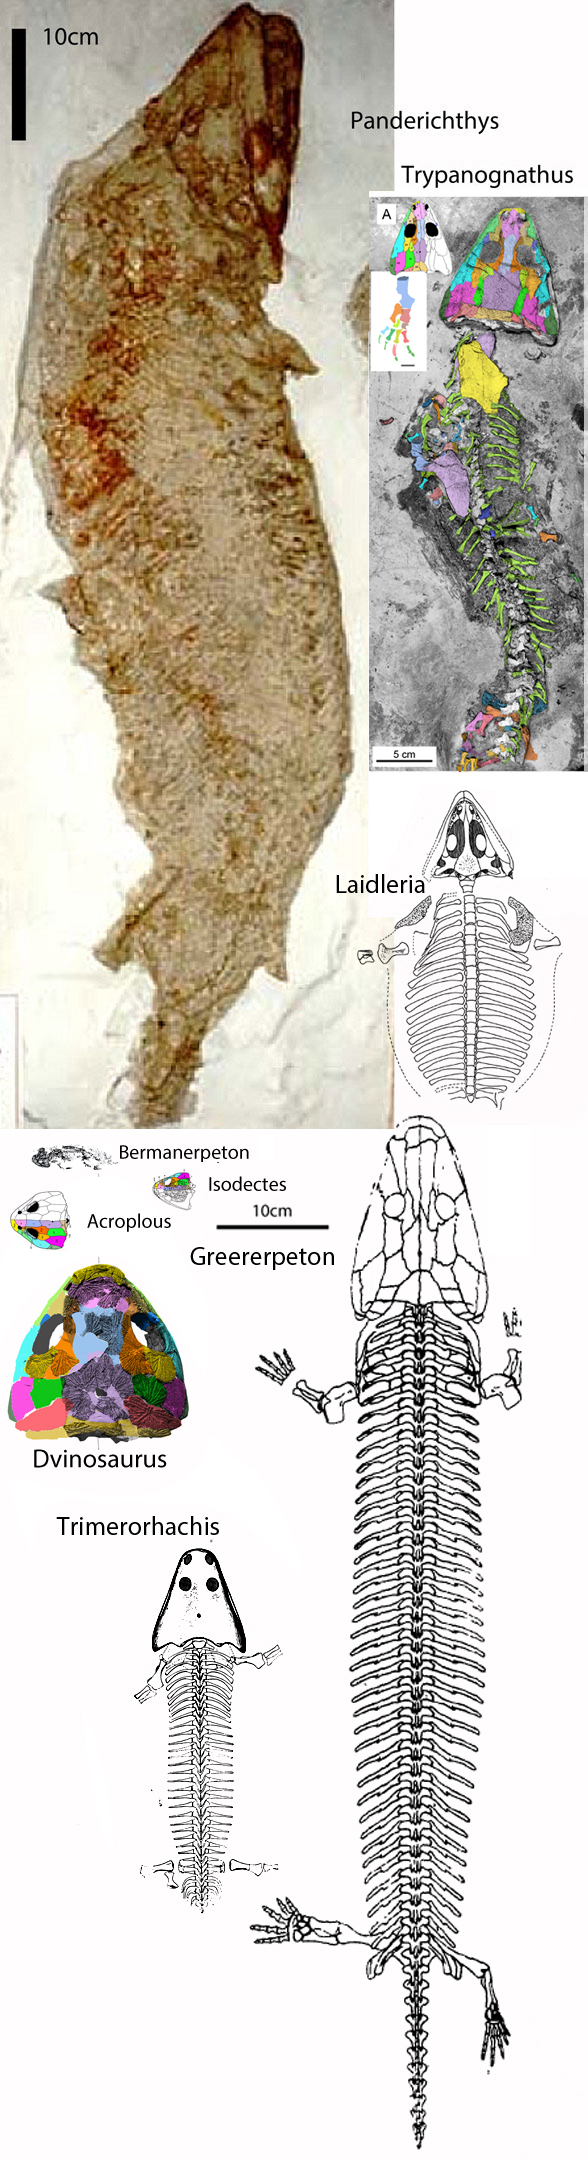 Panderichthys and Trypanognathus overall in dorsal view